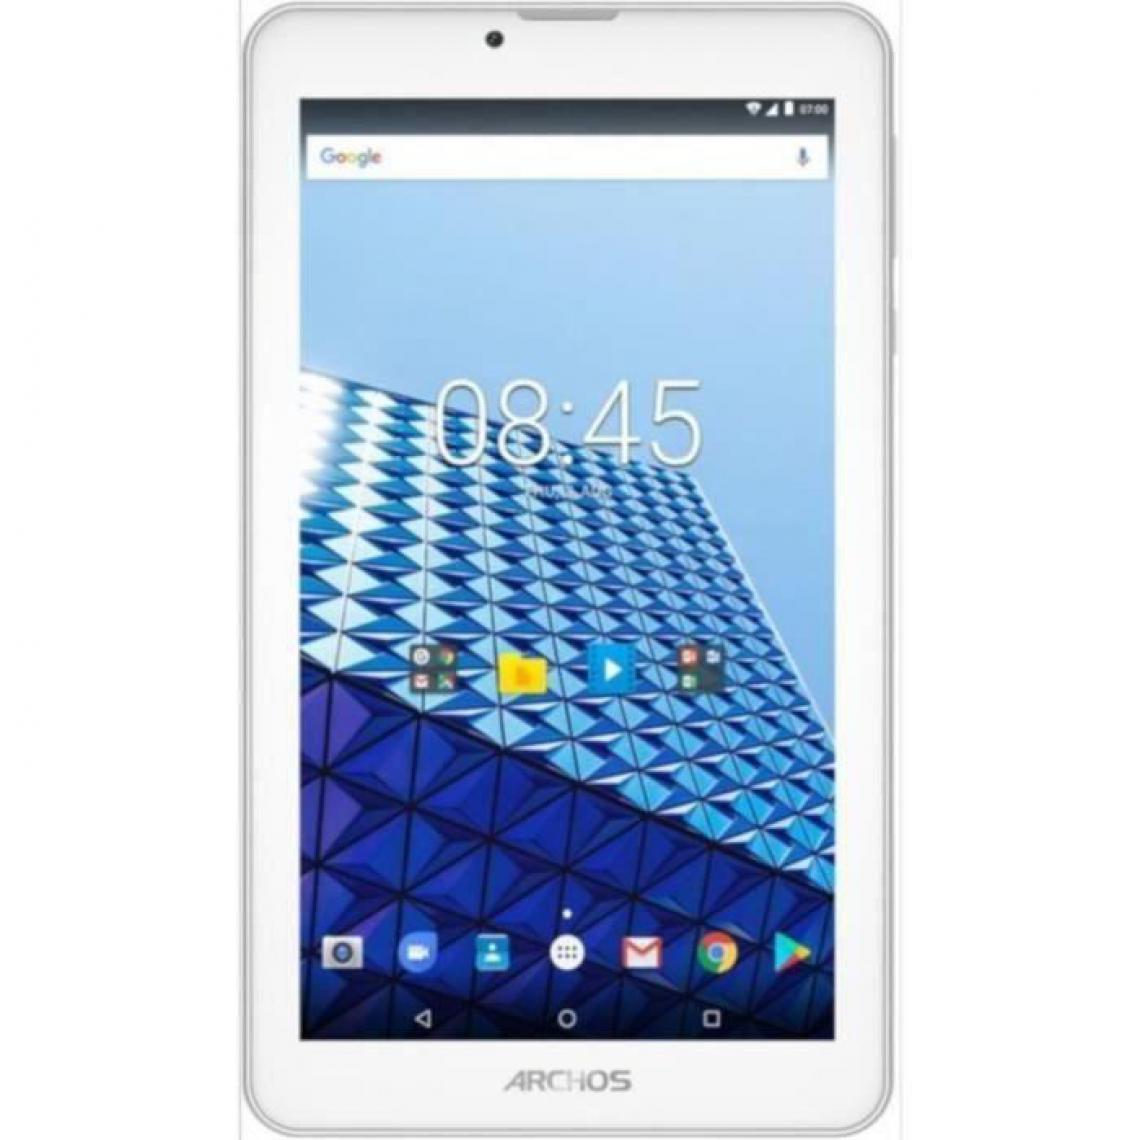 Archos - ARCHOS Tablette Tactile Access 70 - 7 - RAM 1Go - Stockage 8Go - Android 7.0 - Tablette Android